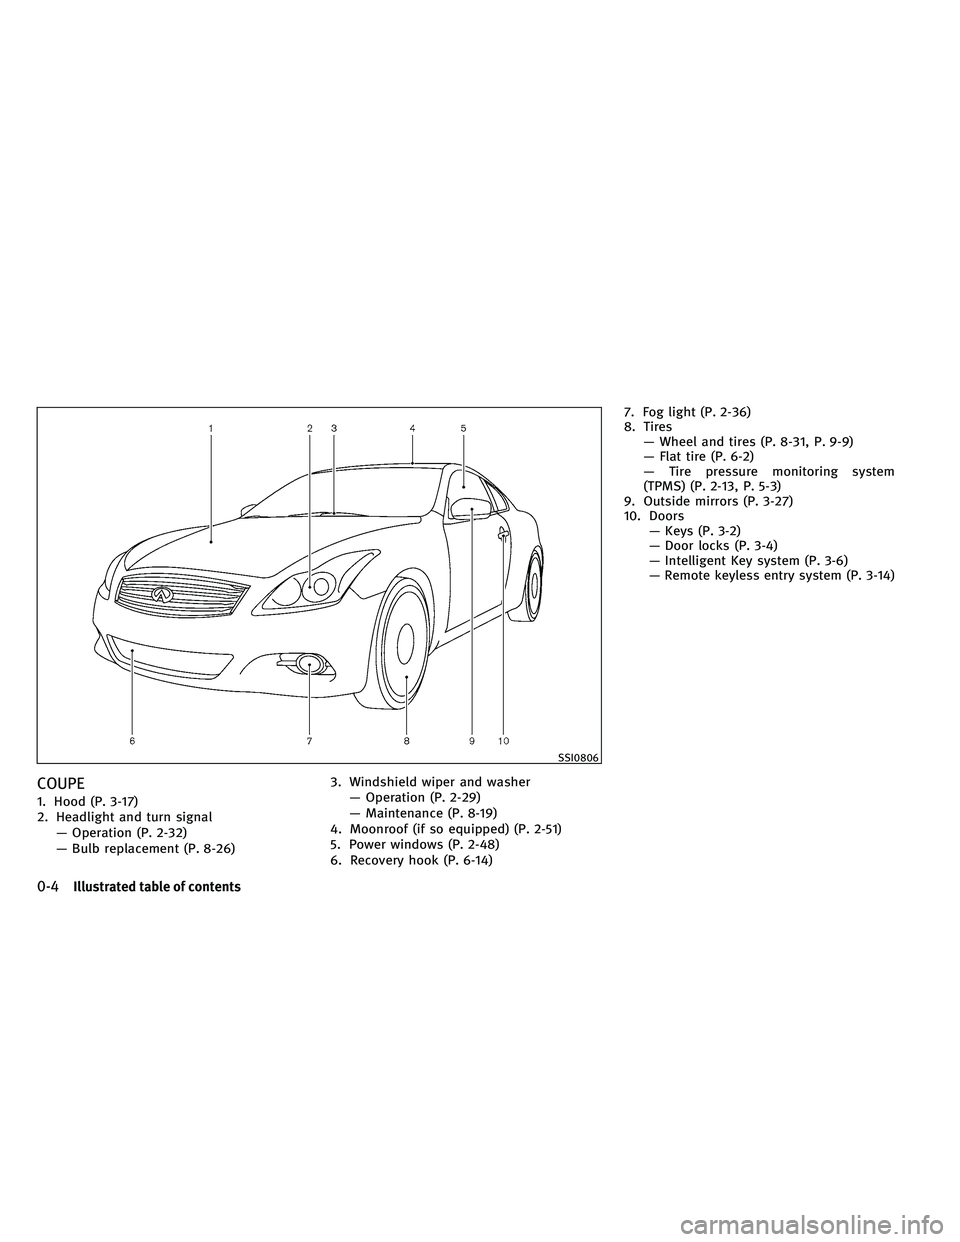 INFINITI G 2011  Owners Manual COUPE
1. Hood (P. 3-17)
2. Headlight and turn signal— Operation (P. 2-32)
— Bulb replacement (P. 8-26) 3. Windshield wiper and washer
— Operation (P. 2-29)
— Maintenance (P. 8-19)
4. Moonroof 